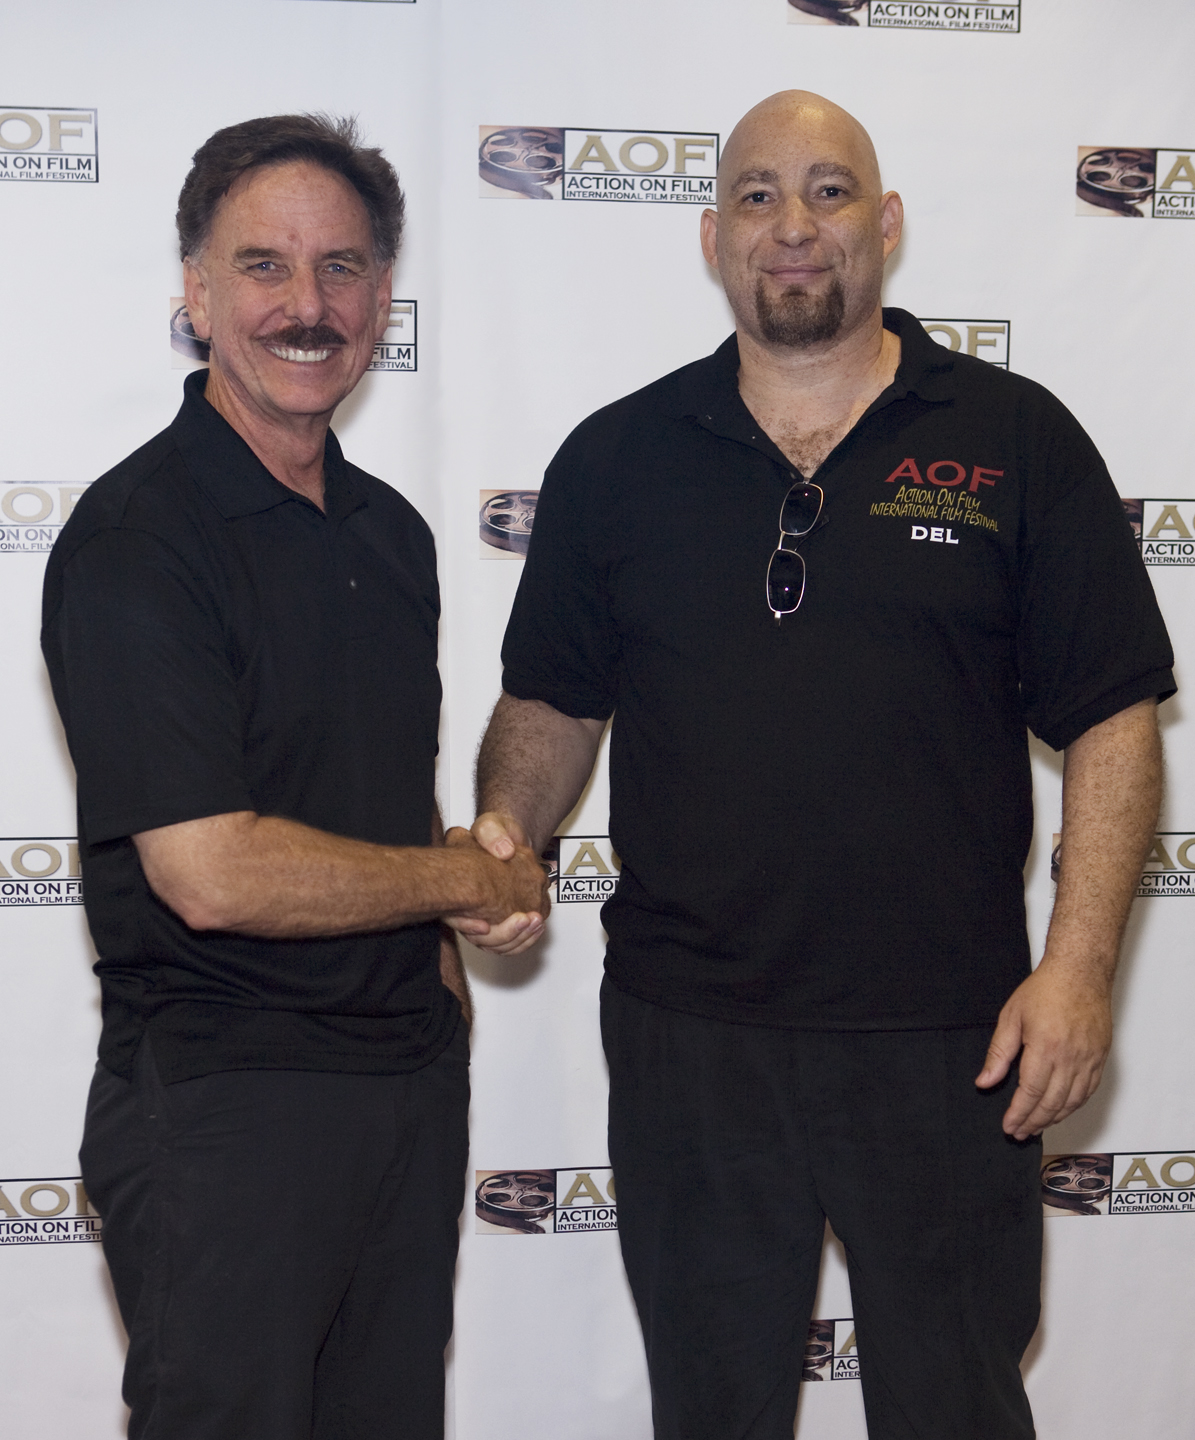 Chris Canole and Del Weston (AOF Director)